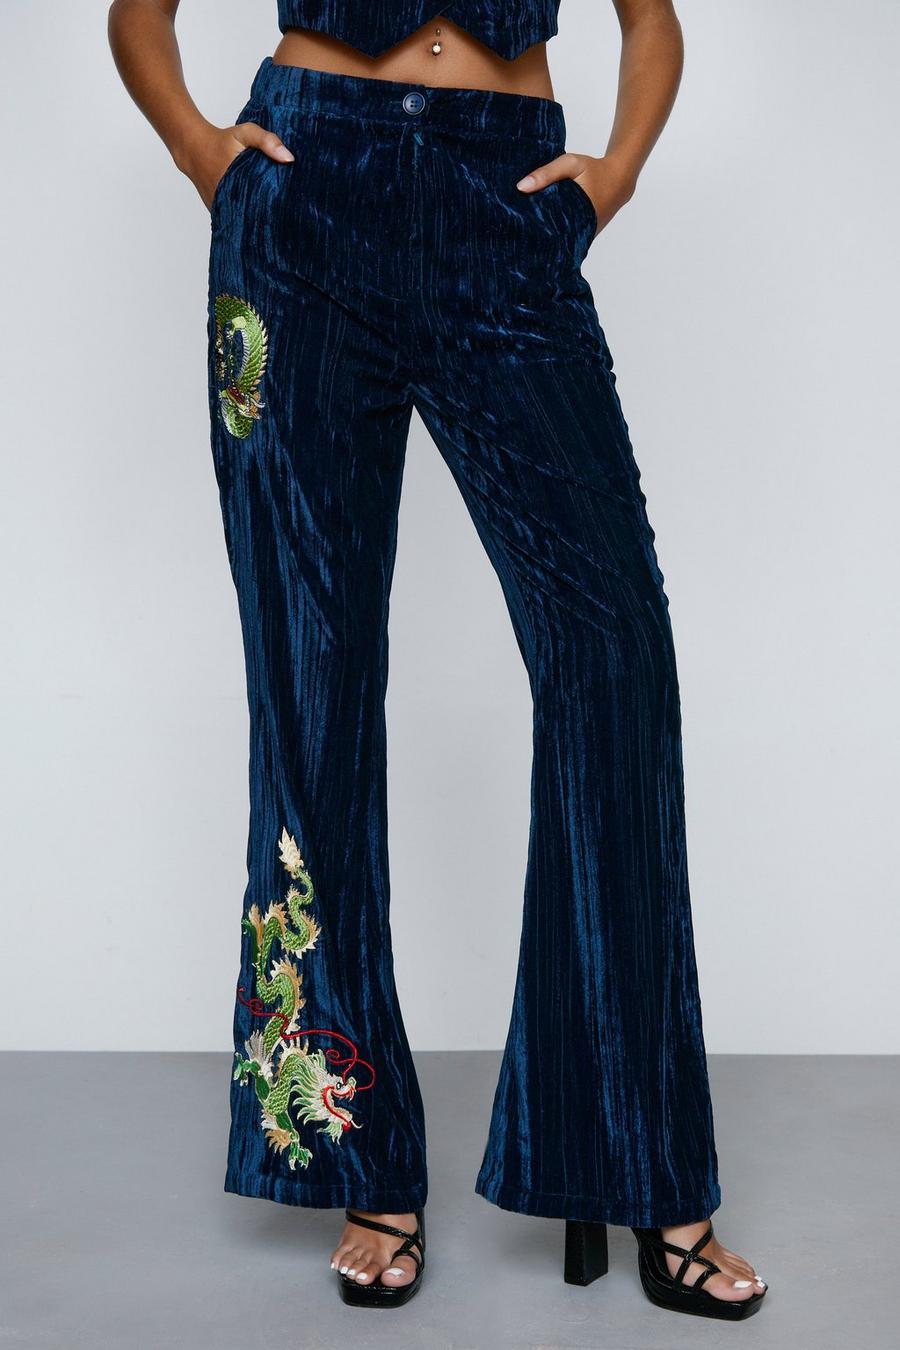 Premium Embroidered Velvet Two Piece Flare Pants